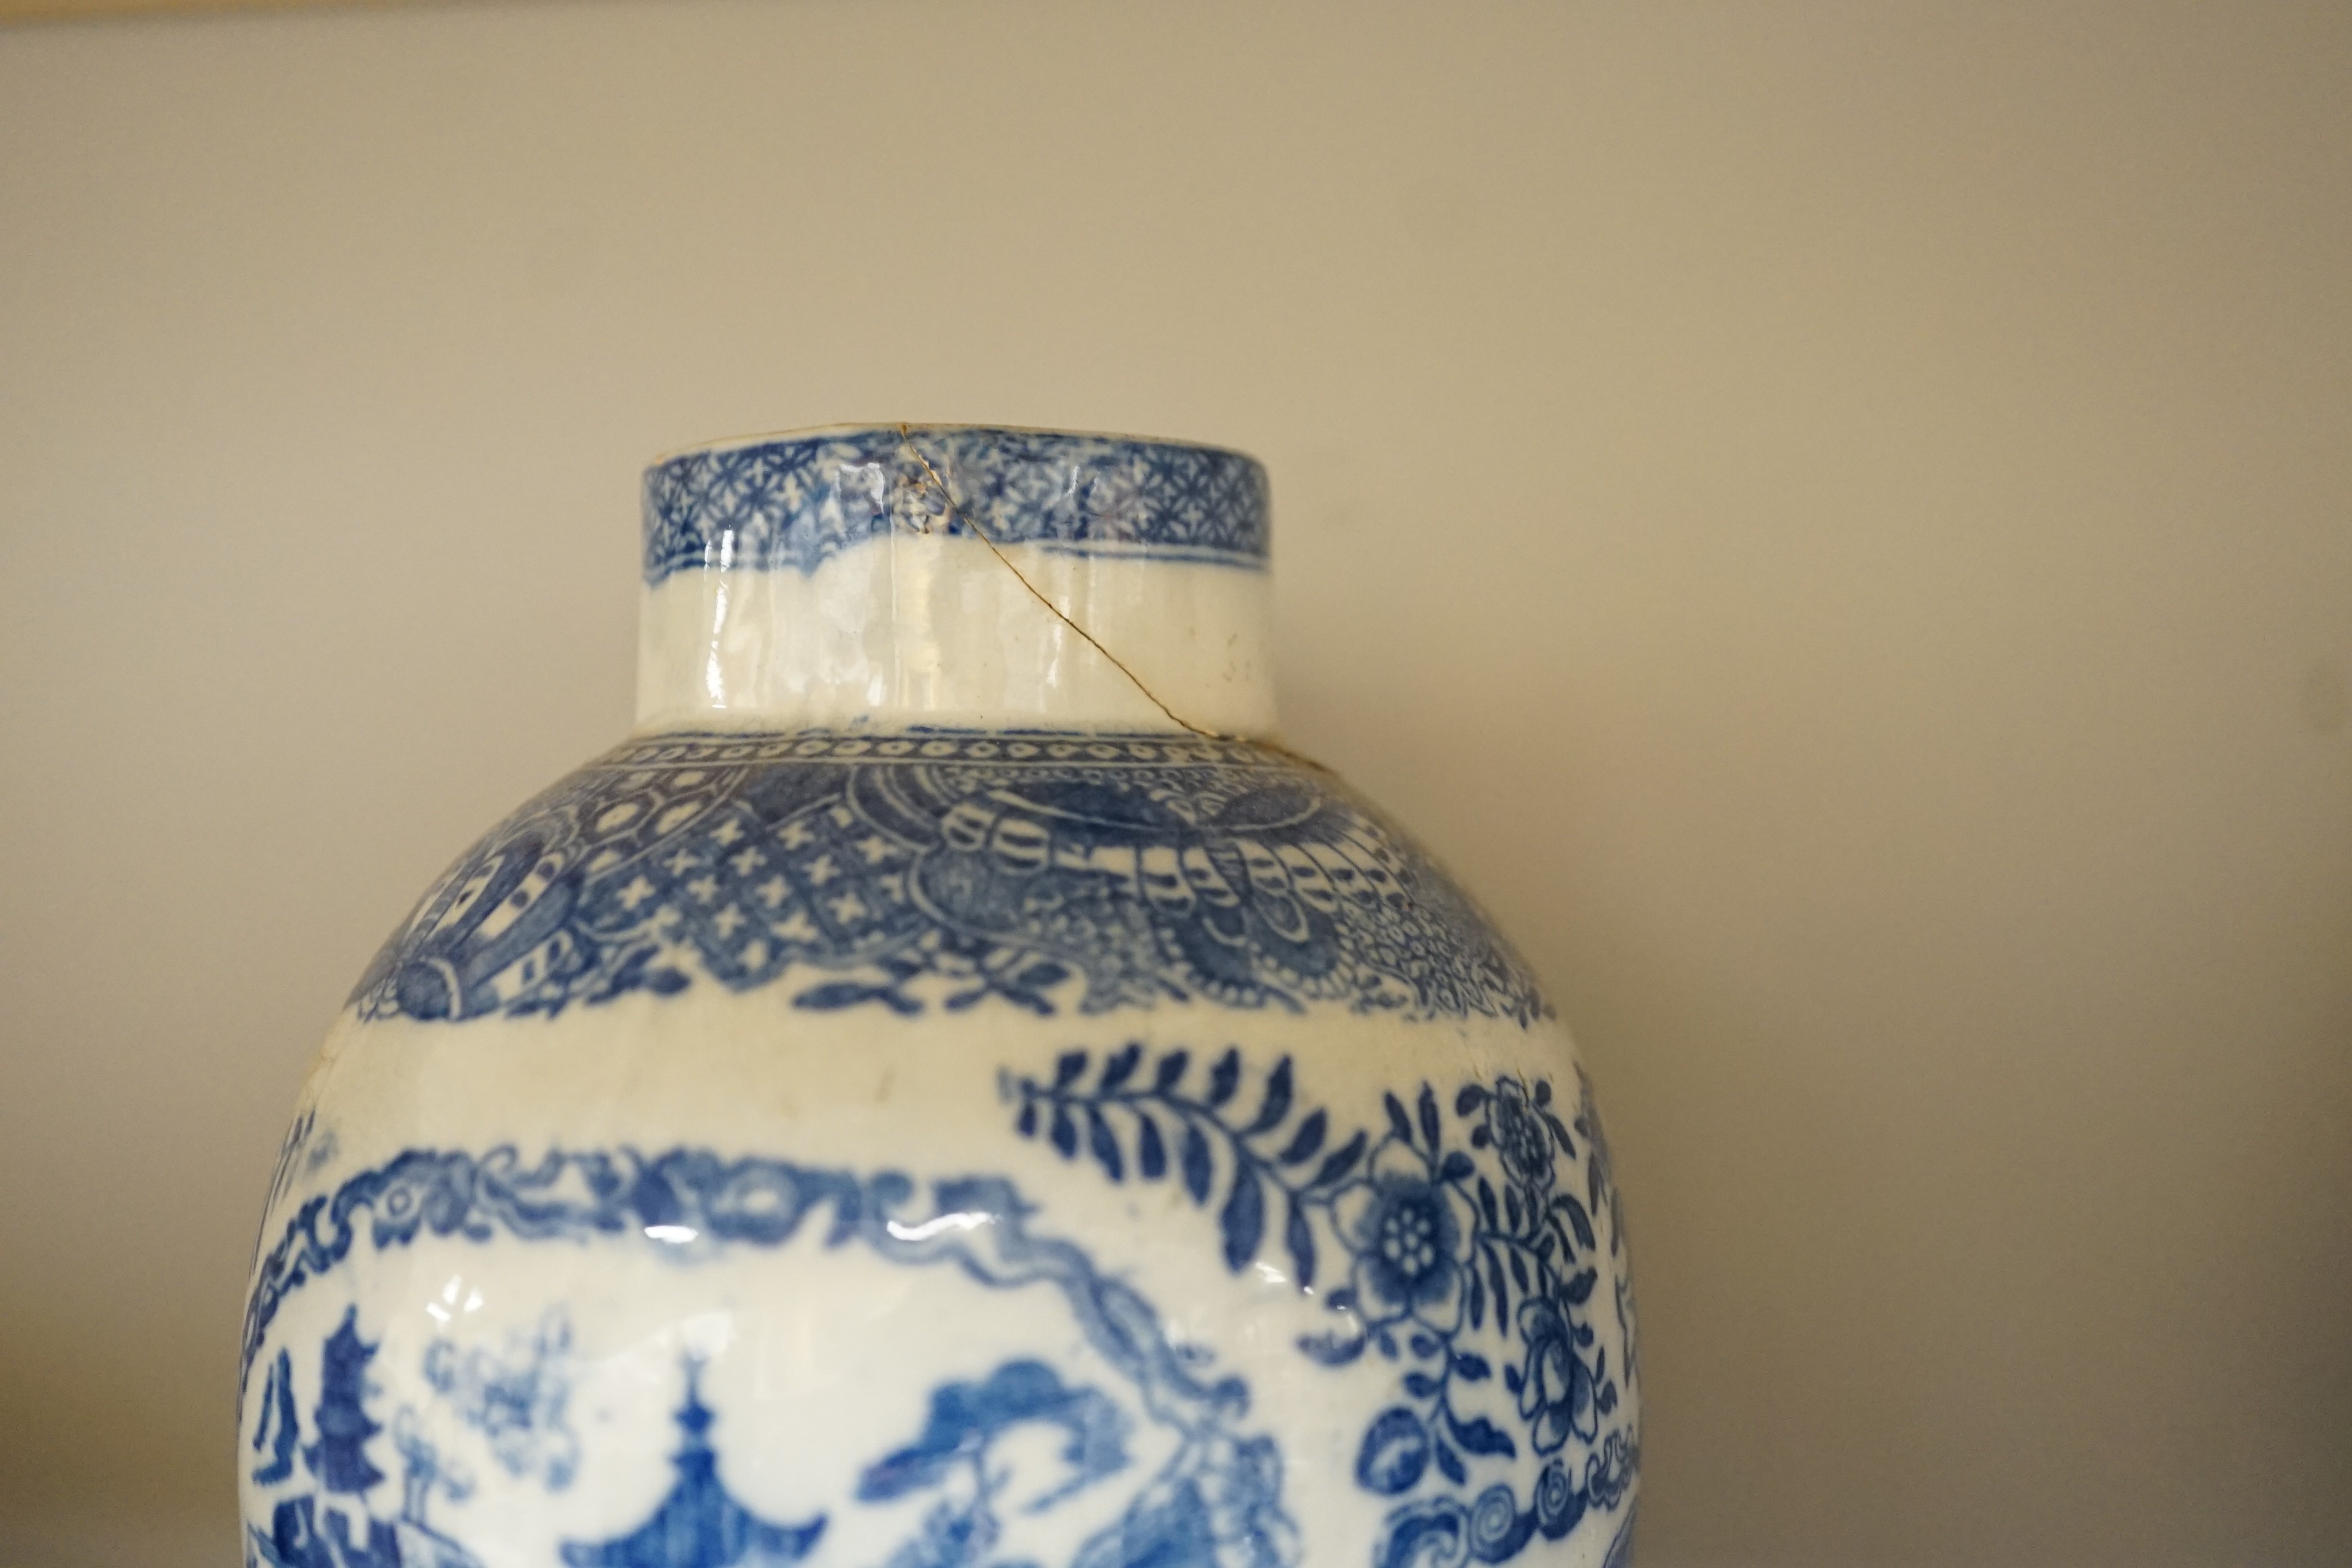 A pair of 19th century blue and white chinoiserie vases, a pearlware teapot, possibly Harley of Lane - Image 5 of 6